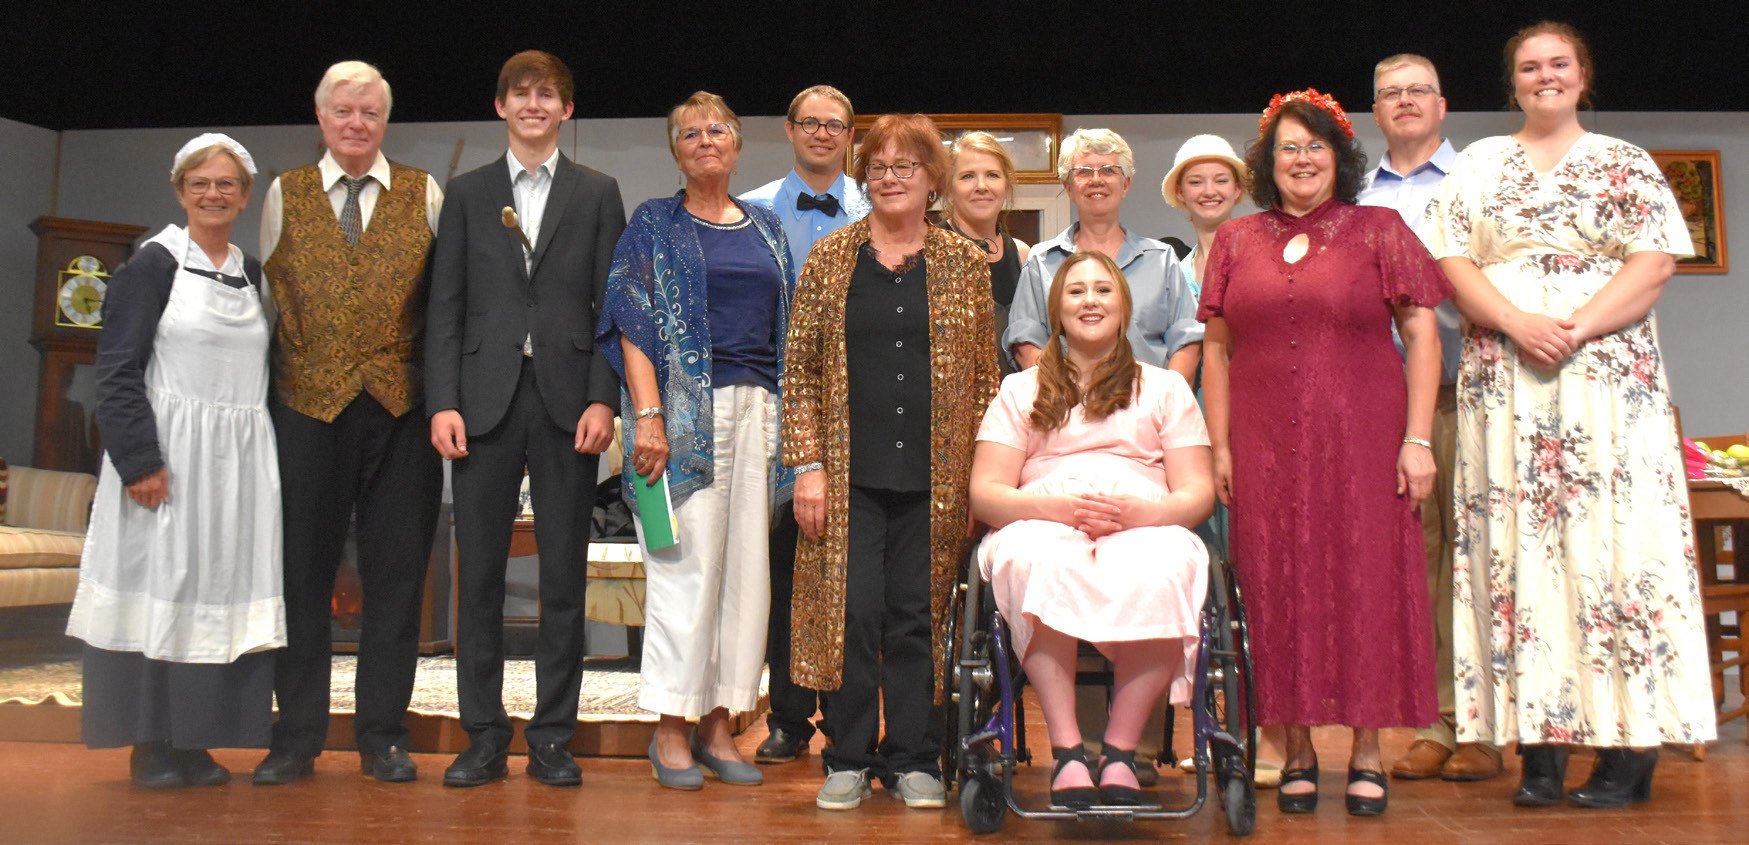 Above: The Osceola Community Players put on their third annual play. Pictured are (left to right) Roxanne Page, Dave Rinehart, Hayden Lavaley, Suzanne Peterson, Clyde Ericson, Gail Channer, Kendra Gustafson, Wanda Doerr, Erika Burritt, Neve Pavlik, Debbie Girard, Kerry Voigt and Payton DeMers-Sahling. Below: This scene is acted several times as one by one someone is murdered. PCN photos by Beth Sparrow.